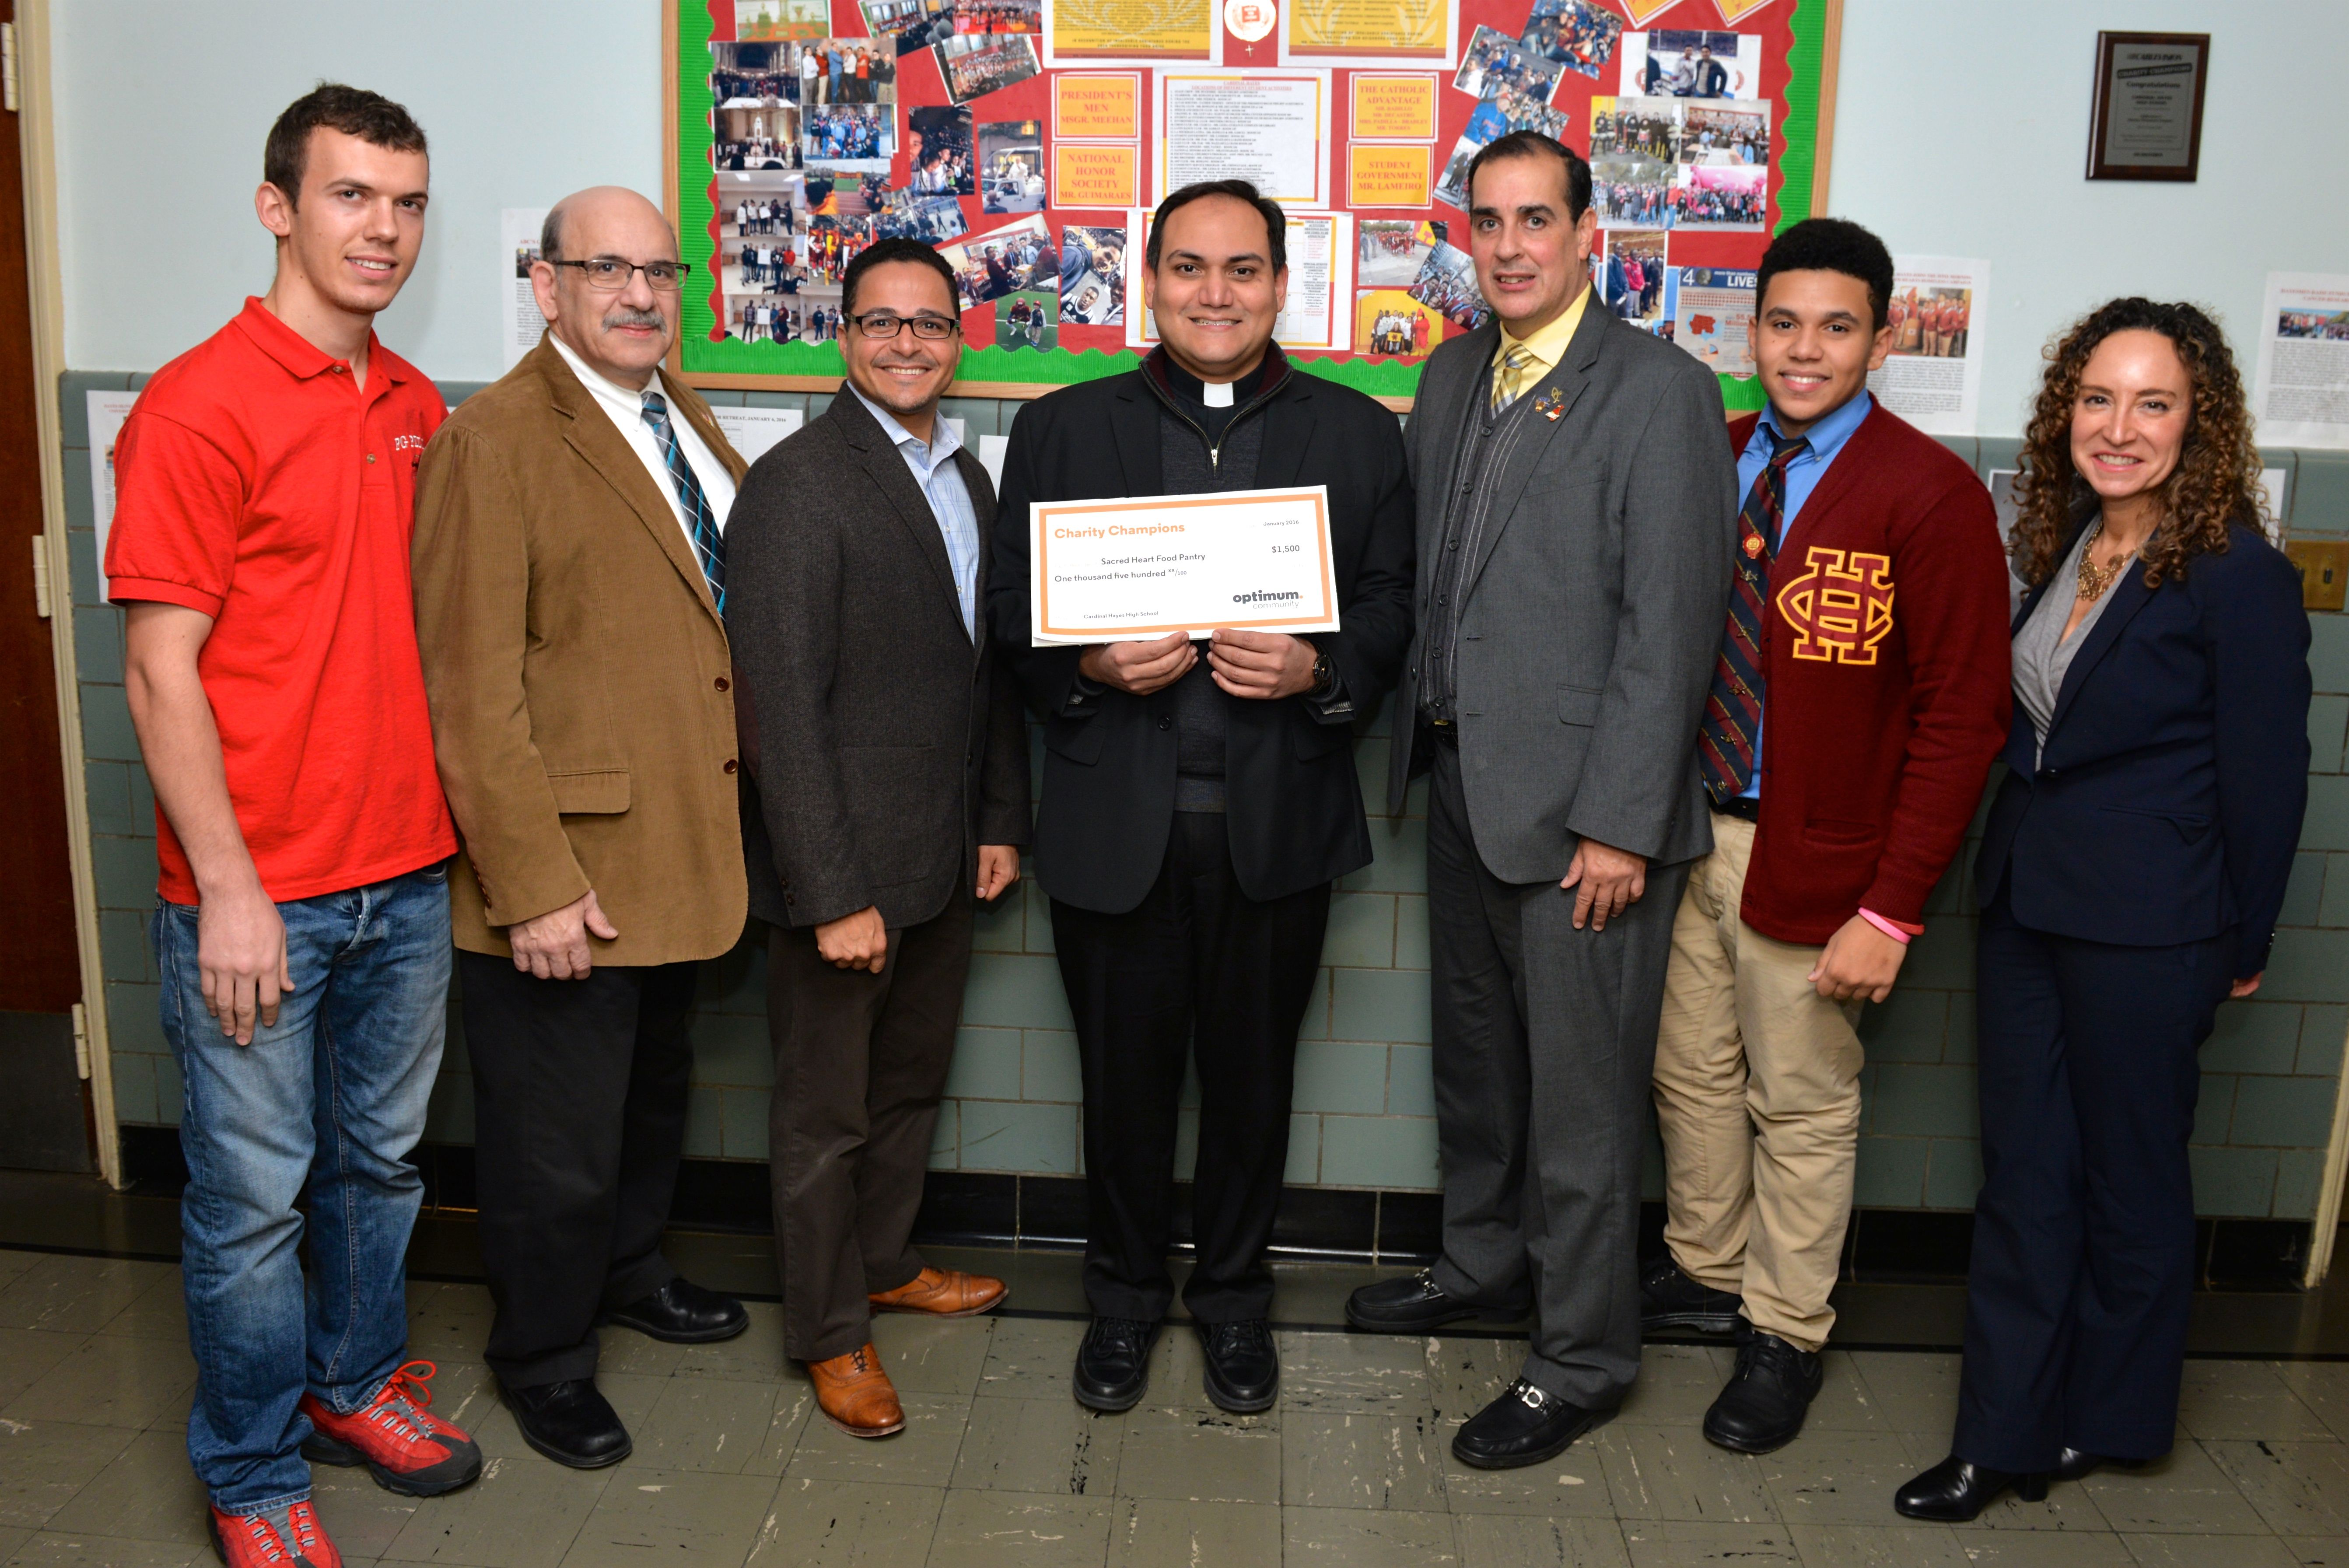 Students at Cardinal Hayes HS Participate in Optimum Community s 7th